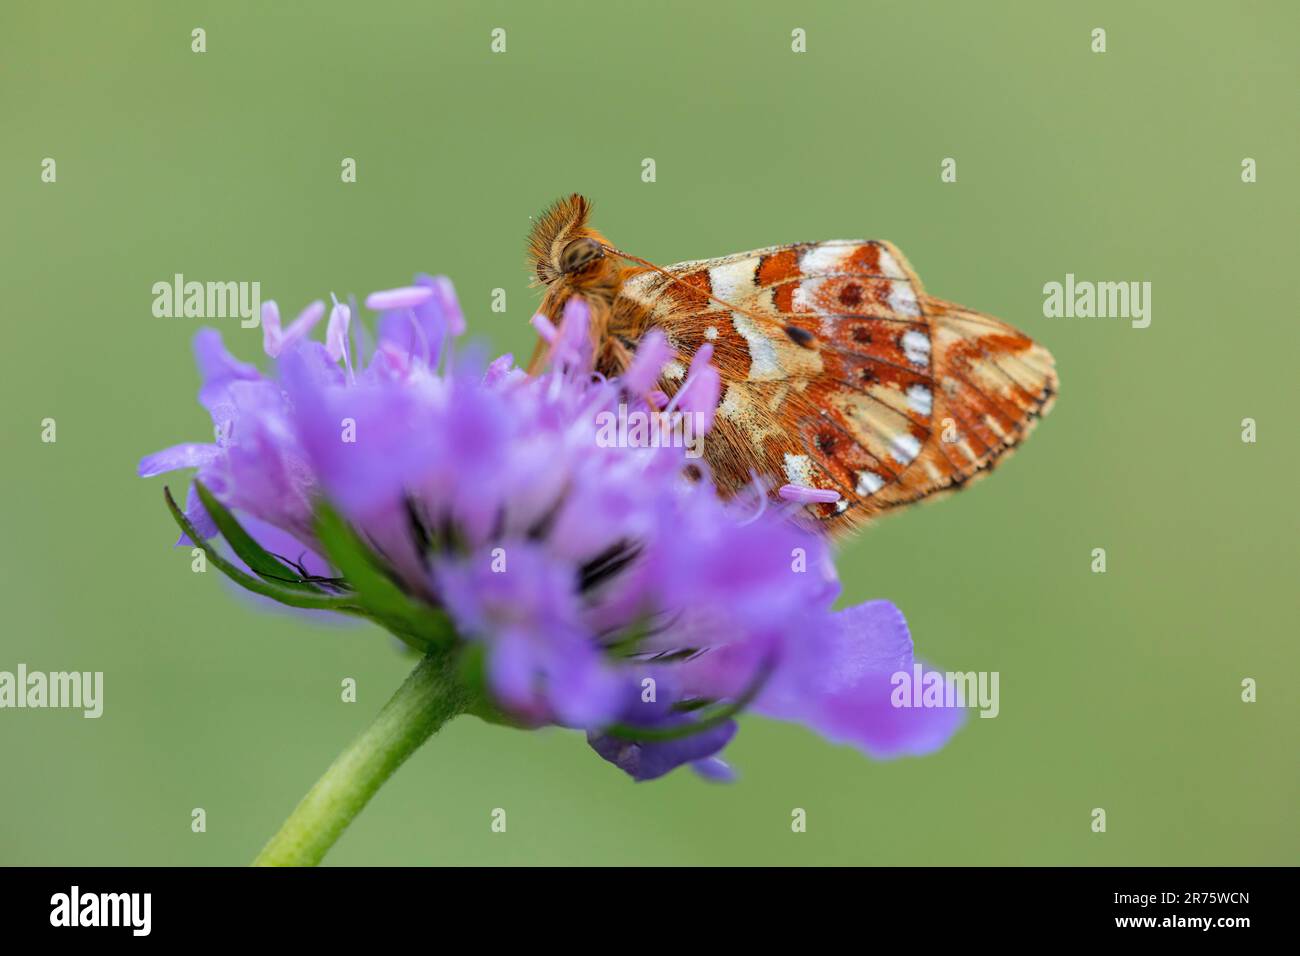 shepherd's fritillary, Boloria pales on scabiosa, close-up, lateral view Stock Photo